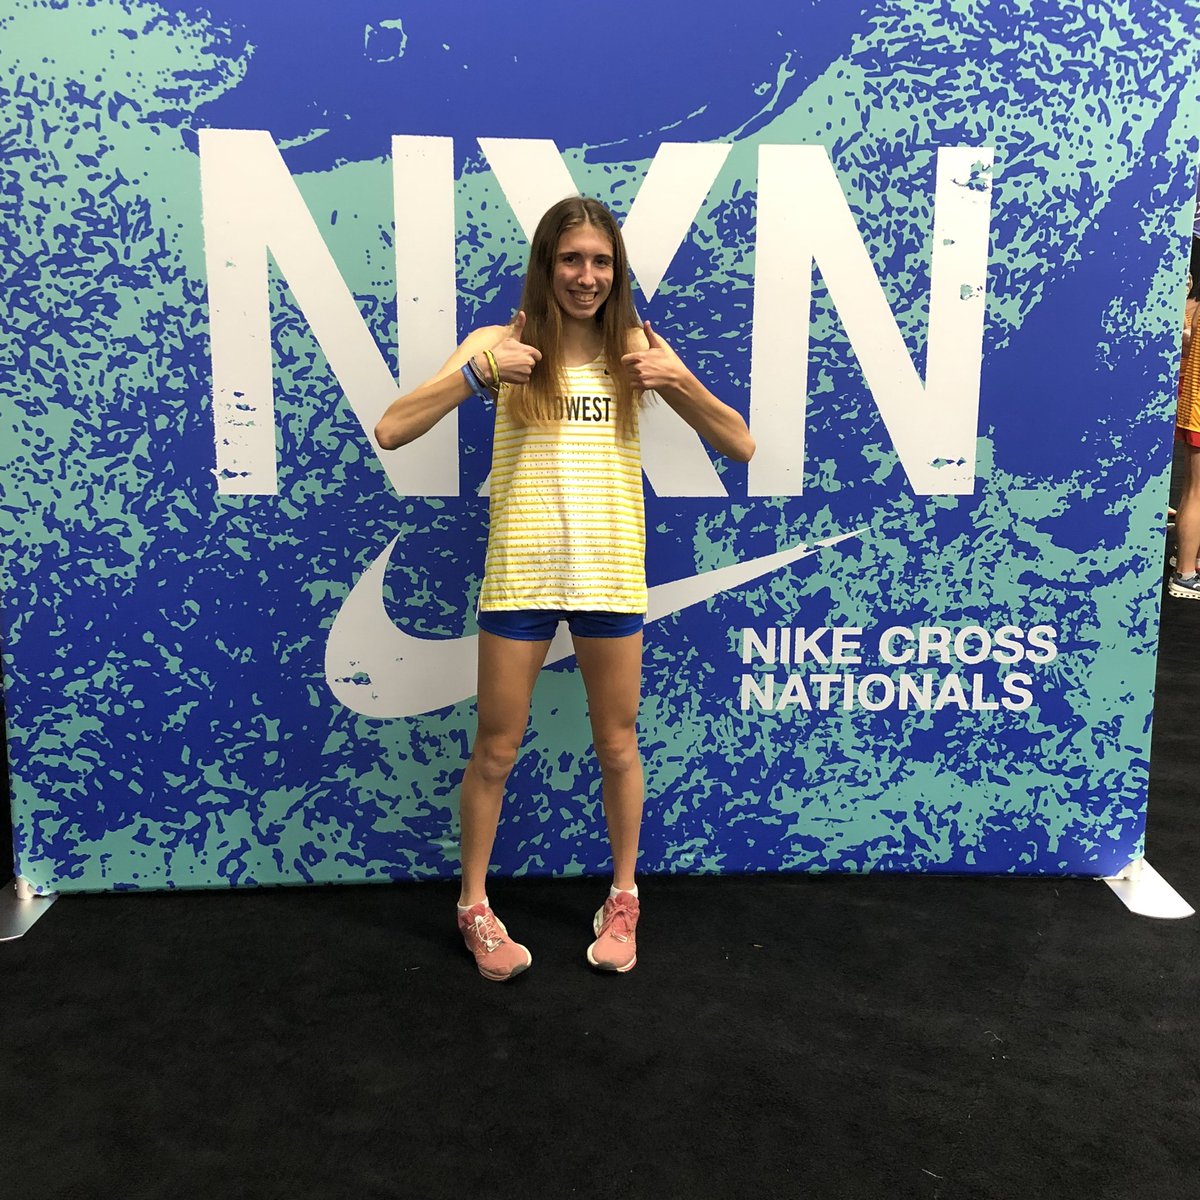 Good luck to Addison Knoblauch as she competes in the Nike Cross Nationals (NXN) today! nxn.runnerspace.com